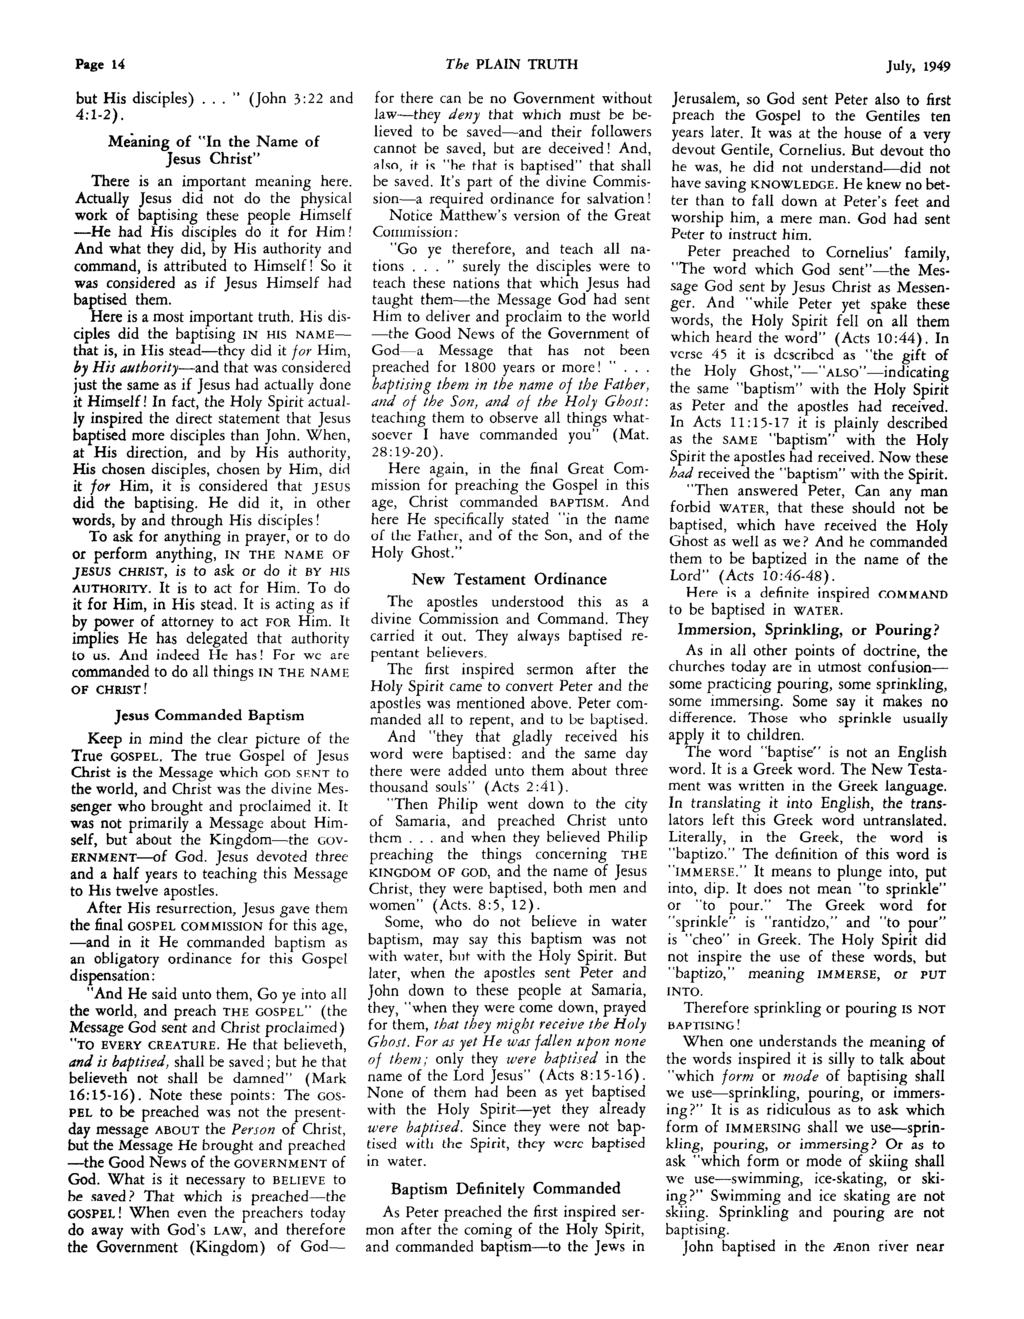 Page 14 The PLAIN TRUTH July, 1949 but His disciples)... (John 3:22 and 4:l-2). Meaning of In the Name of Jesus Christ There is an important meaning here.